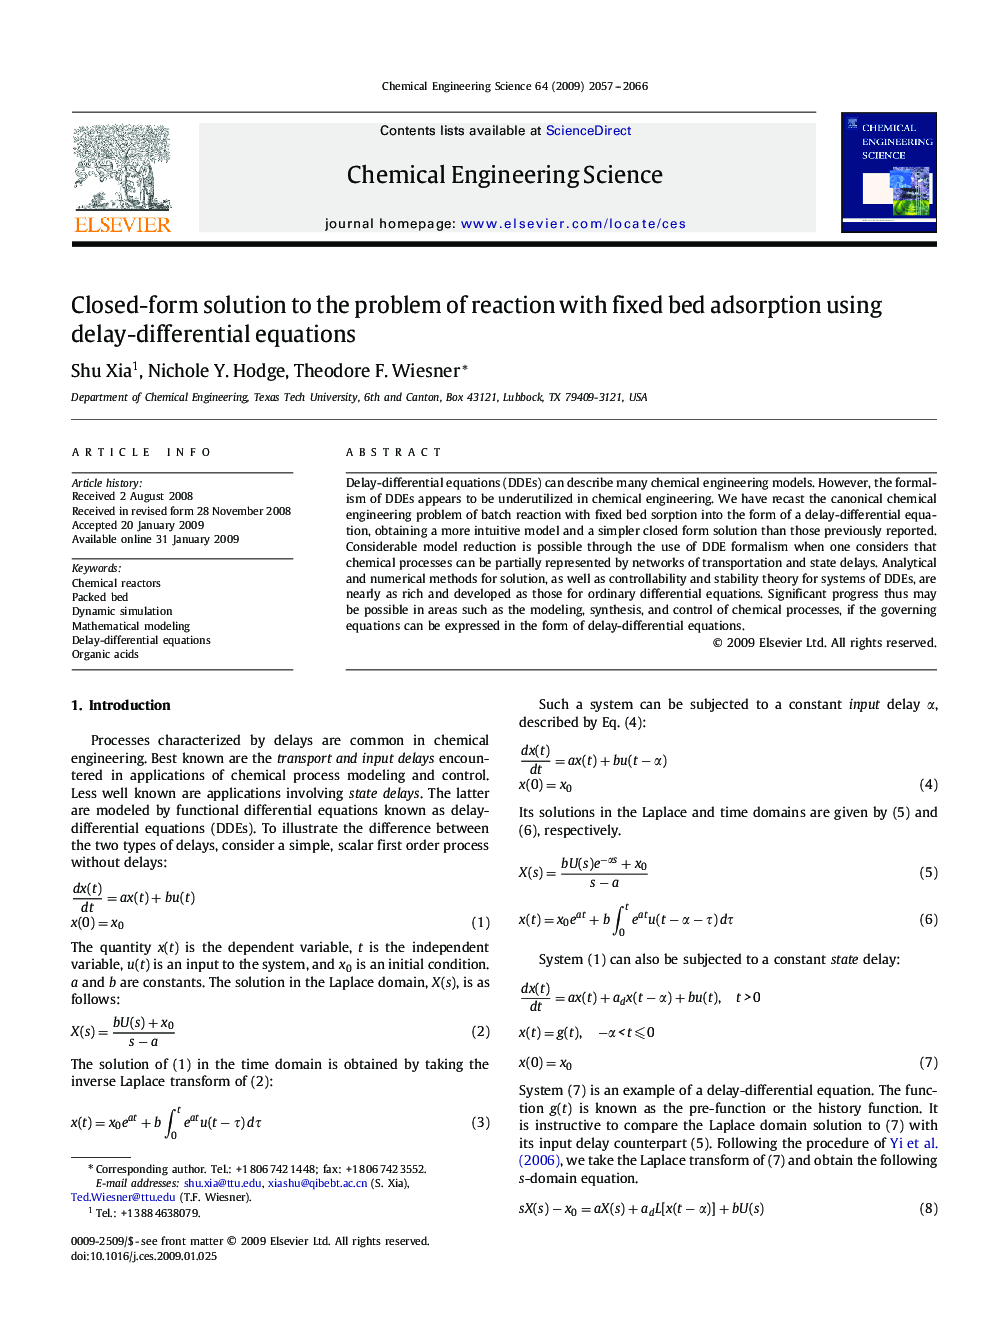 Closed-form solution to the problem of reaction with fixed bed adsorption using delay-differential equations